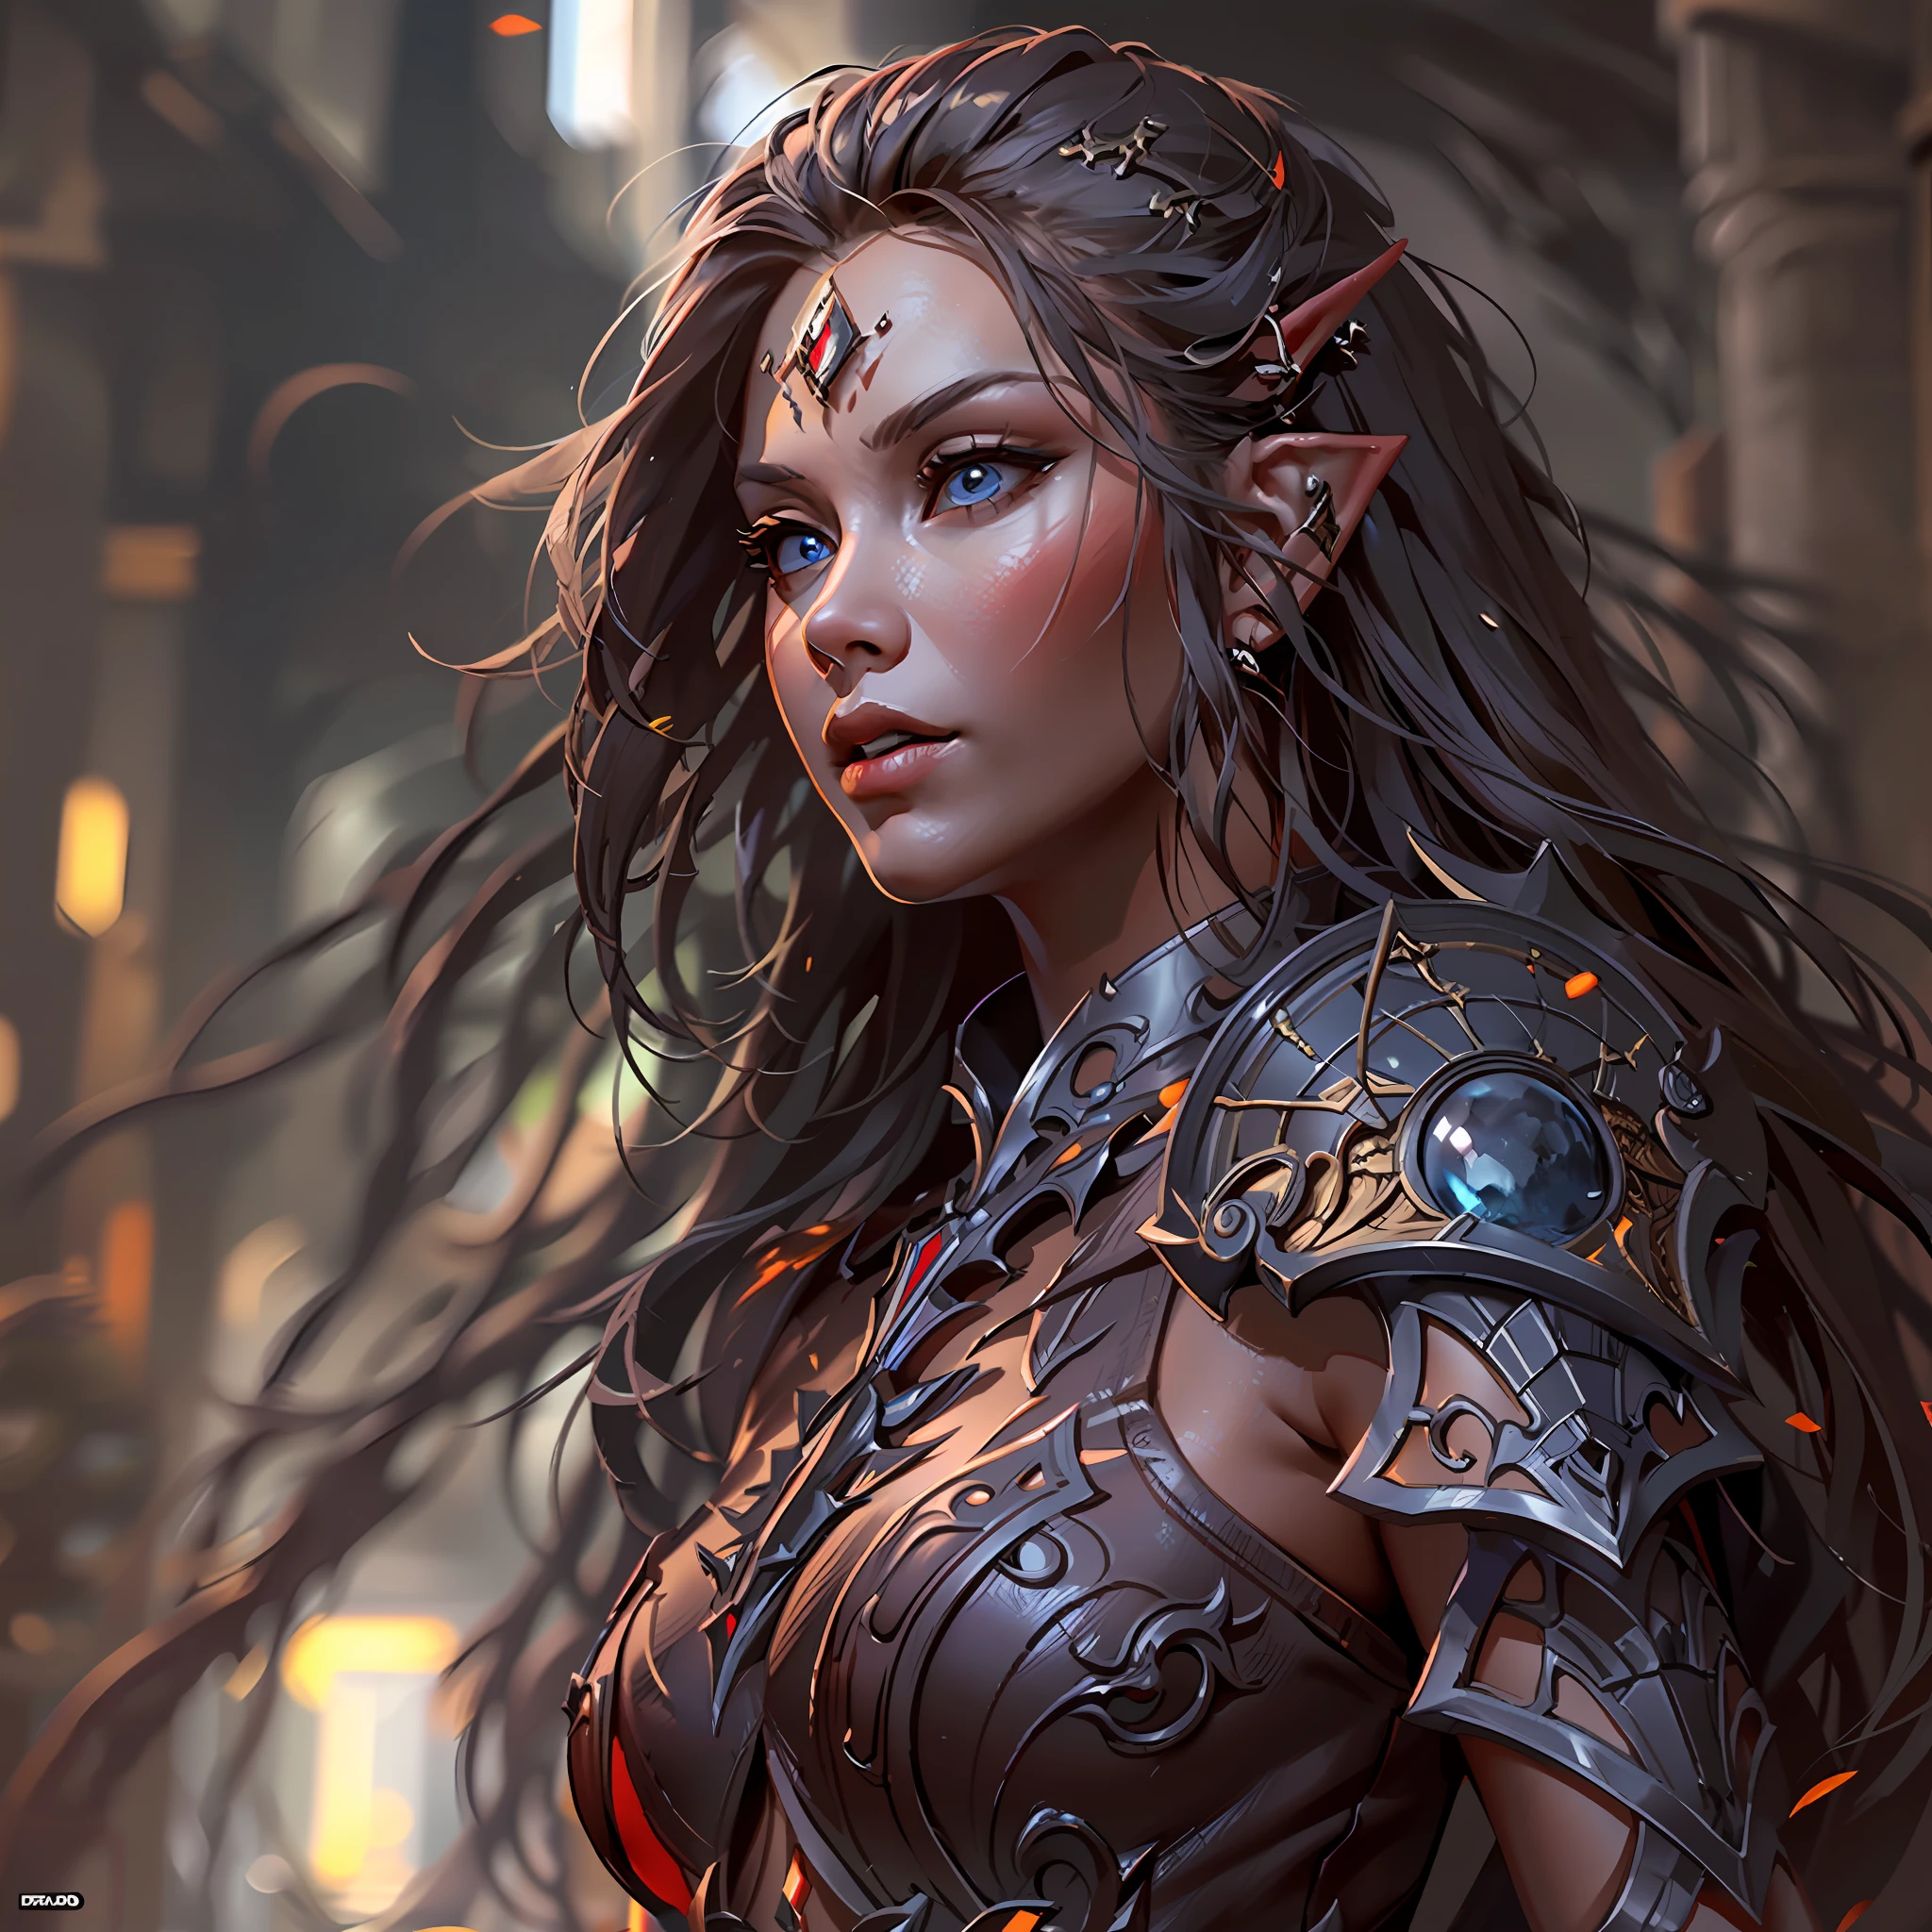 high details, best quality, 8k, [ultra detailed], masterpiece, best quality, (extremely detailed), dynamic angle, ultra wide shot, RAW, photorealistic, fantasy art, dnd art, rpg art, realistic art, a wide angle picture of an epic female elf arcane warrior, warrior of magic, fighter of the arcana, full body, [[anatomically correct]] full body (1.5 intricate details, Masterpiece, best quality) casting a spell (1.5 intricate details, Masterpiece, best quality), casting an epic spell, colorful magical sigils in the air, colorful arcane markings floating (1.6 intricate details, Masterpiece, best quality) armed with an [epic magical sword] (1.5 intricate details, Masterpiece, best quality) epic magical sword glowing in red light. in fantasy urban street (1.5 intricate details, Masterpiece, best quality), a female beautiful epic elf wearing elven leather armor (1.4 intricate details, Masterpiece, best quality), high heeled leather boots, thick hair, long hair, dynamic hair, fair skin intense eyes, fantasy city background (intense details), sun light, backlight, depth of field (1.4 intricate details, Masterpiece, best quality), dynamic angle, (1.4 intricate details, Masterpiece, best quality) 3D rendering, high details, best quality, highres, ultra wide angle